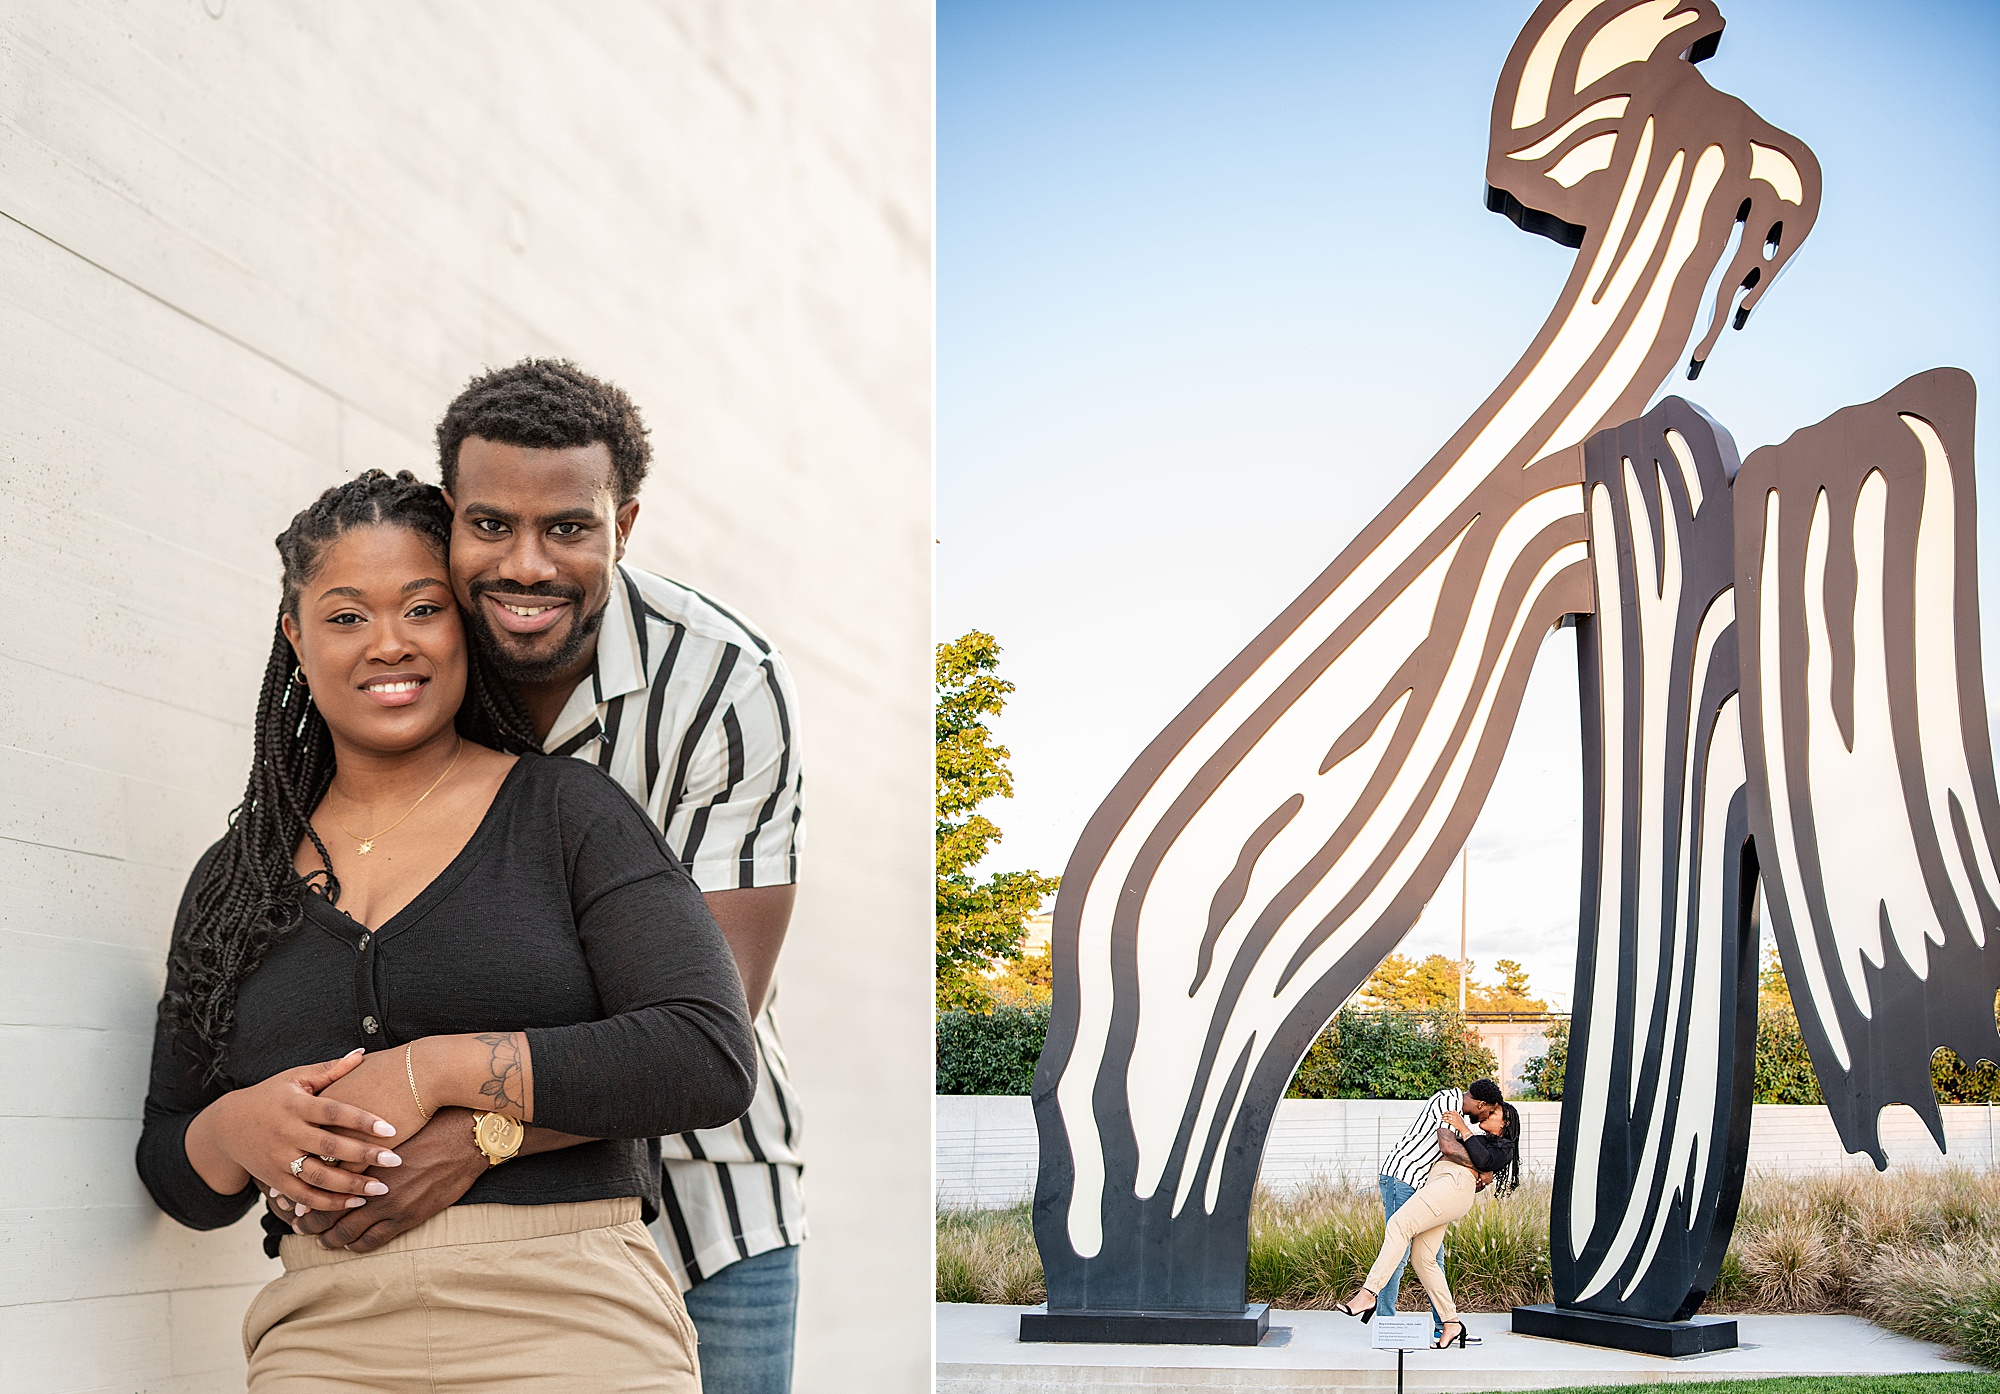 Kennedy Center engagement portraits next to black and white sculpture